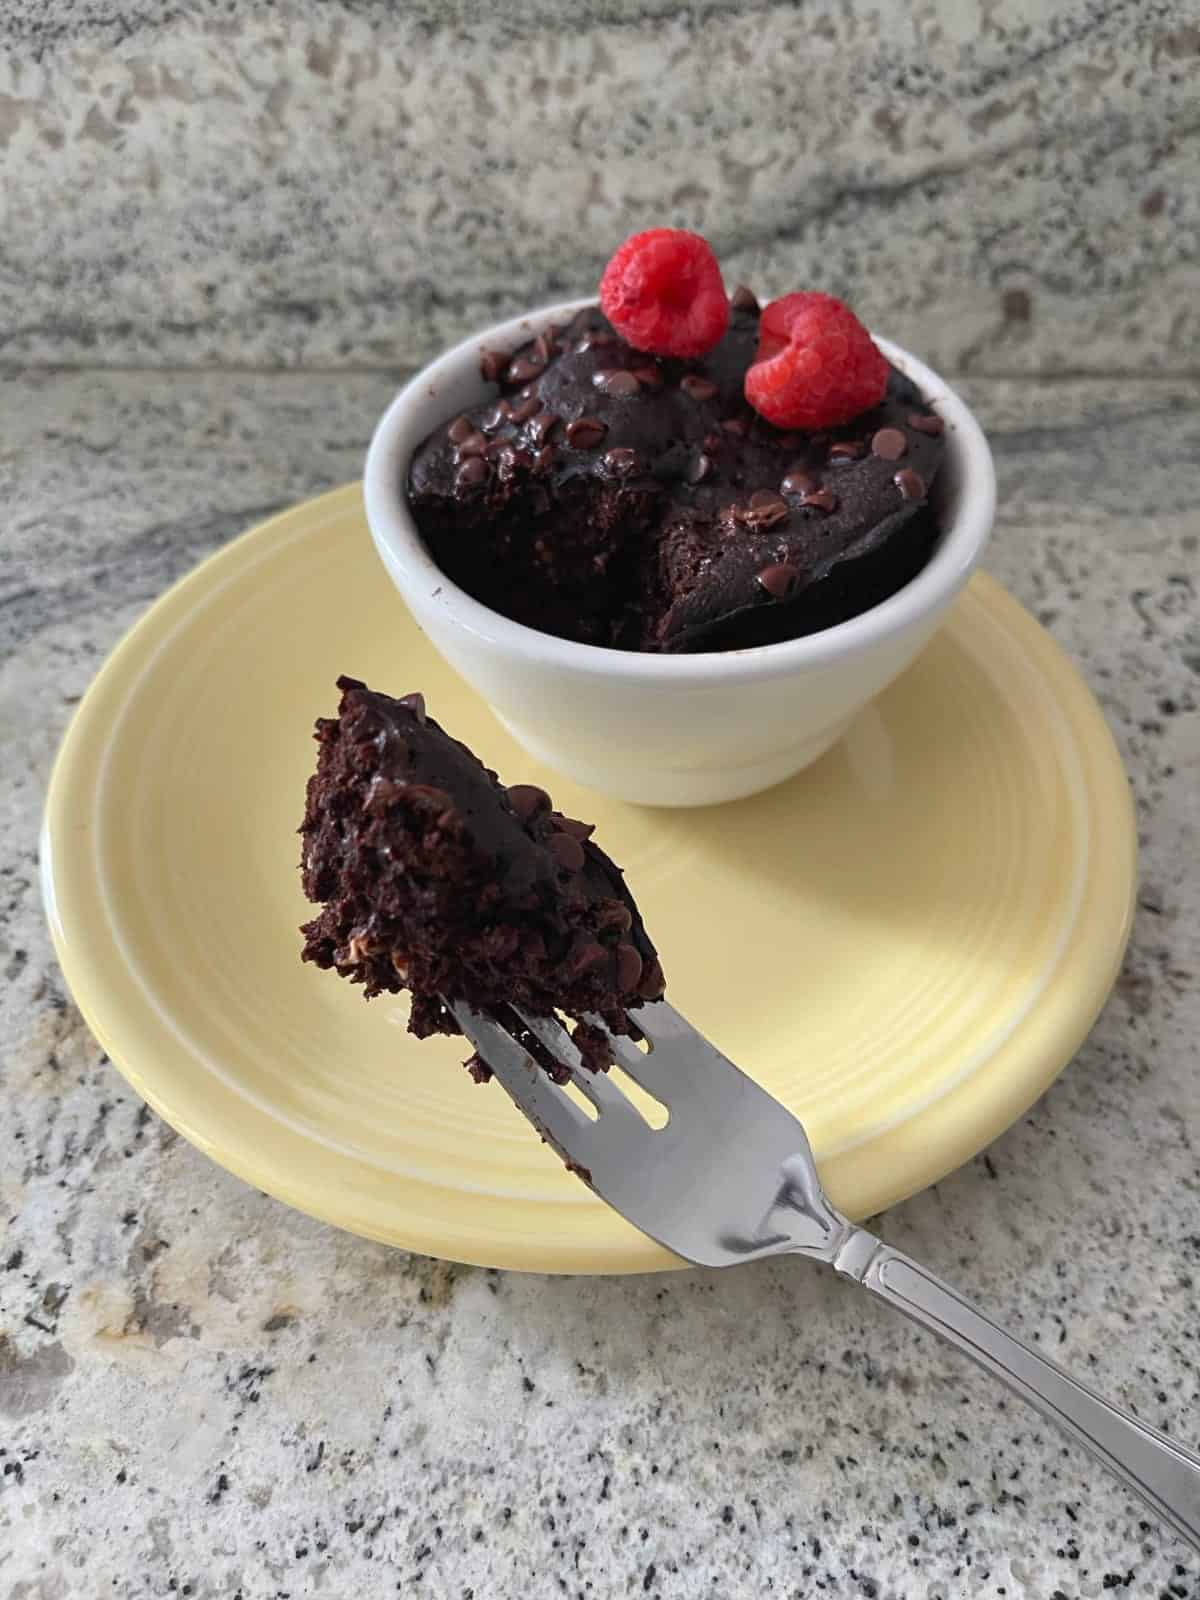 Microwave mocha mug cake topped with fresh raspberries on yellow plate with fork full of cake.